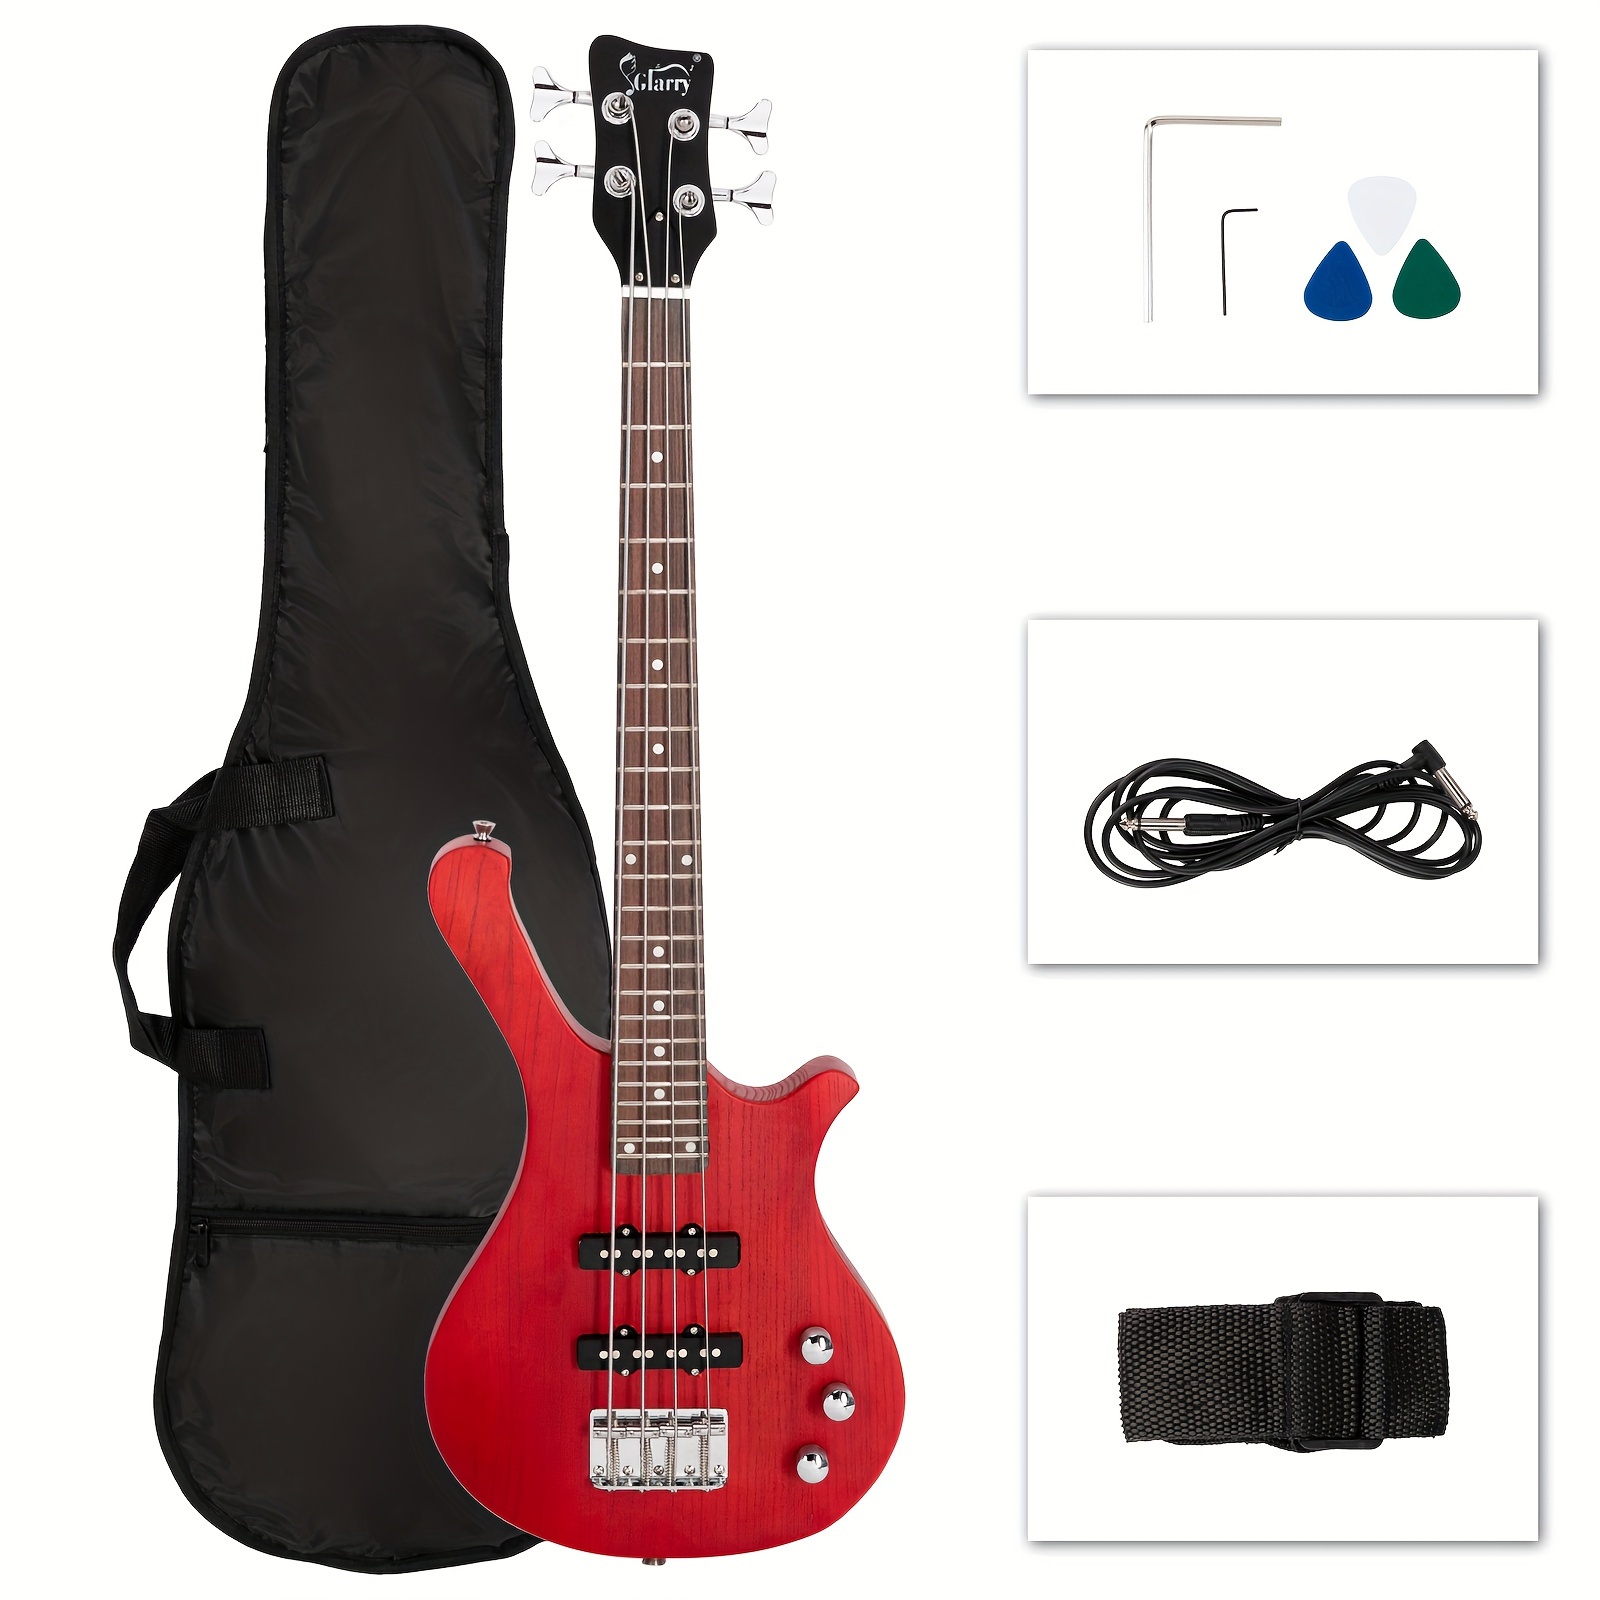 

36in Small Scale Electric Bass Guitar Suit With Mahogany Body Ss Pickups, Guitar Bag, Strap, Cable Red